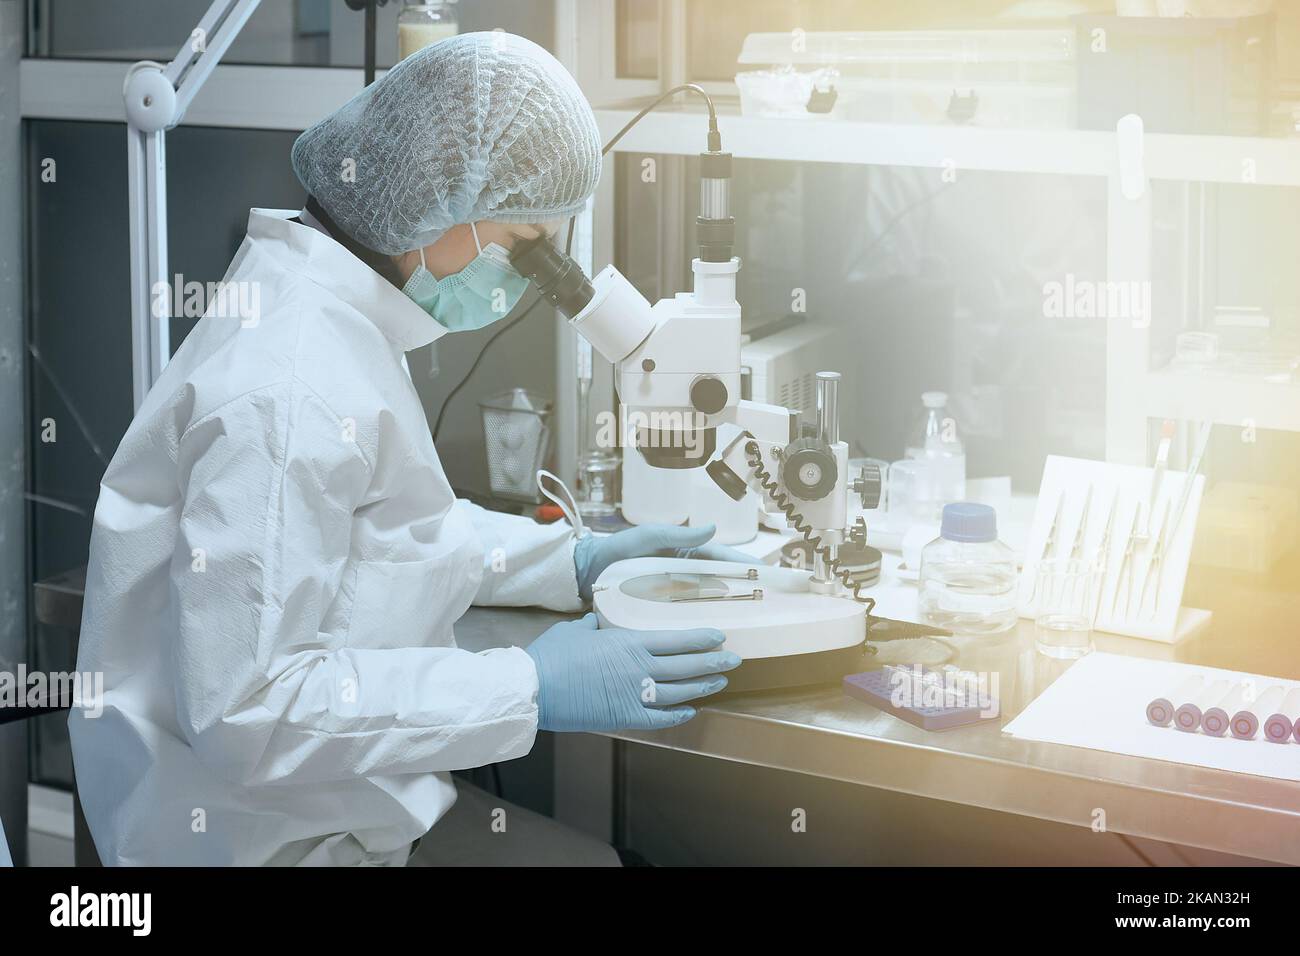 Scientist or nurse with Microscope in a Medical Science Laboratory Stock Photo